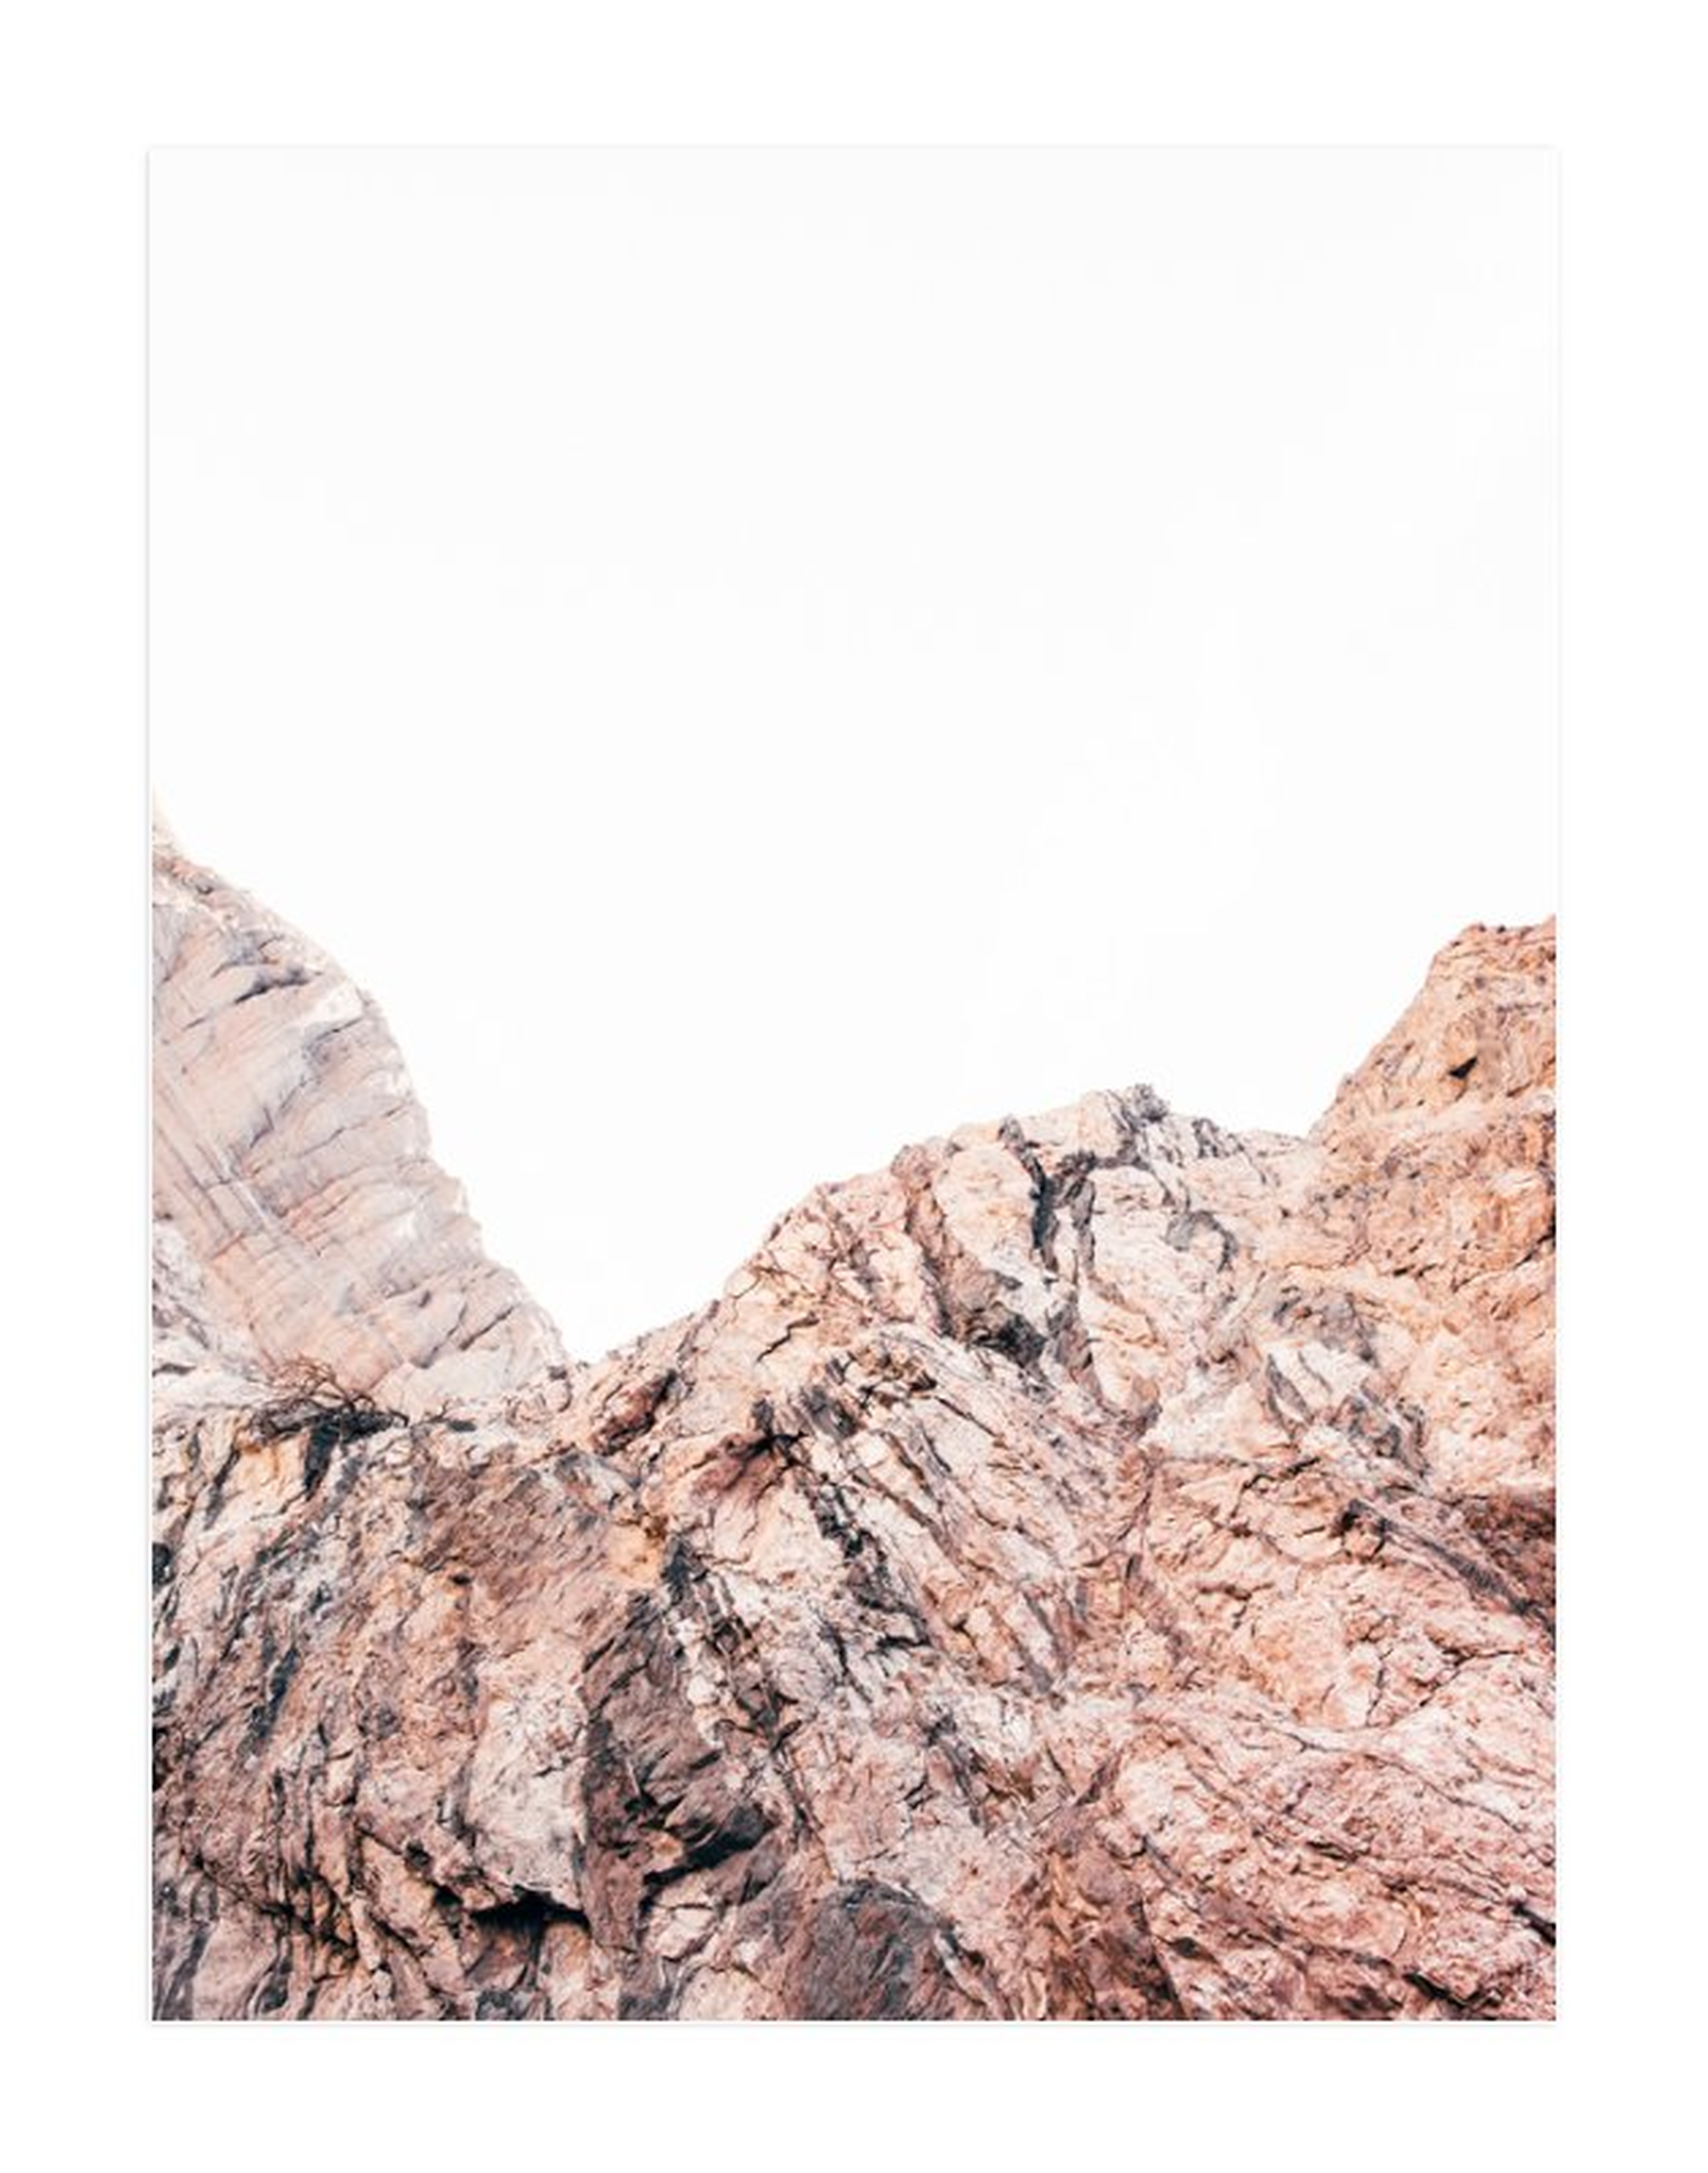 Painted Canyon 5 // Image Size: 30"x40" //Unframed - Minted